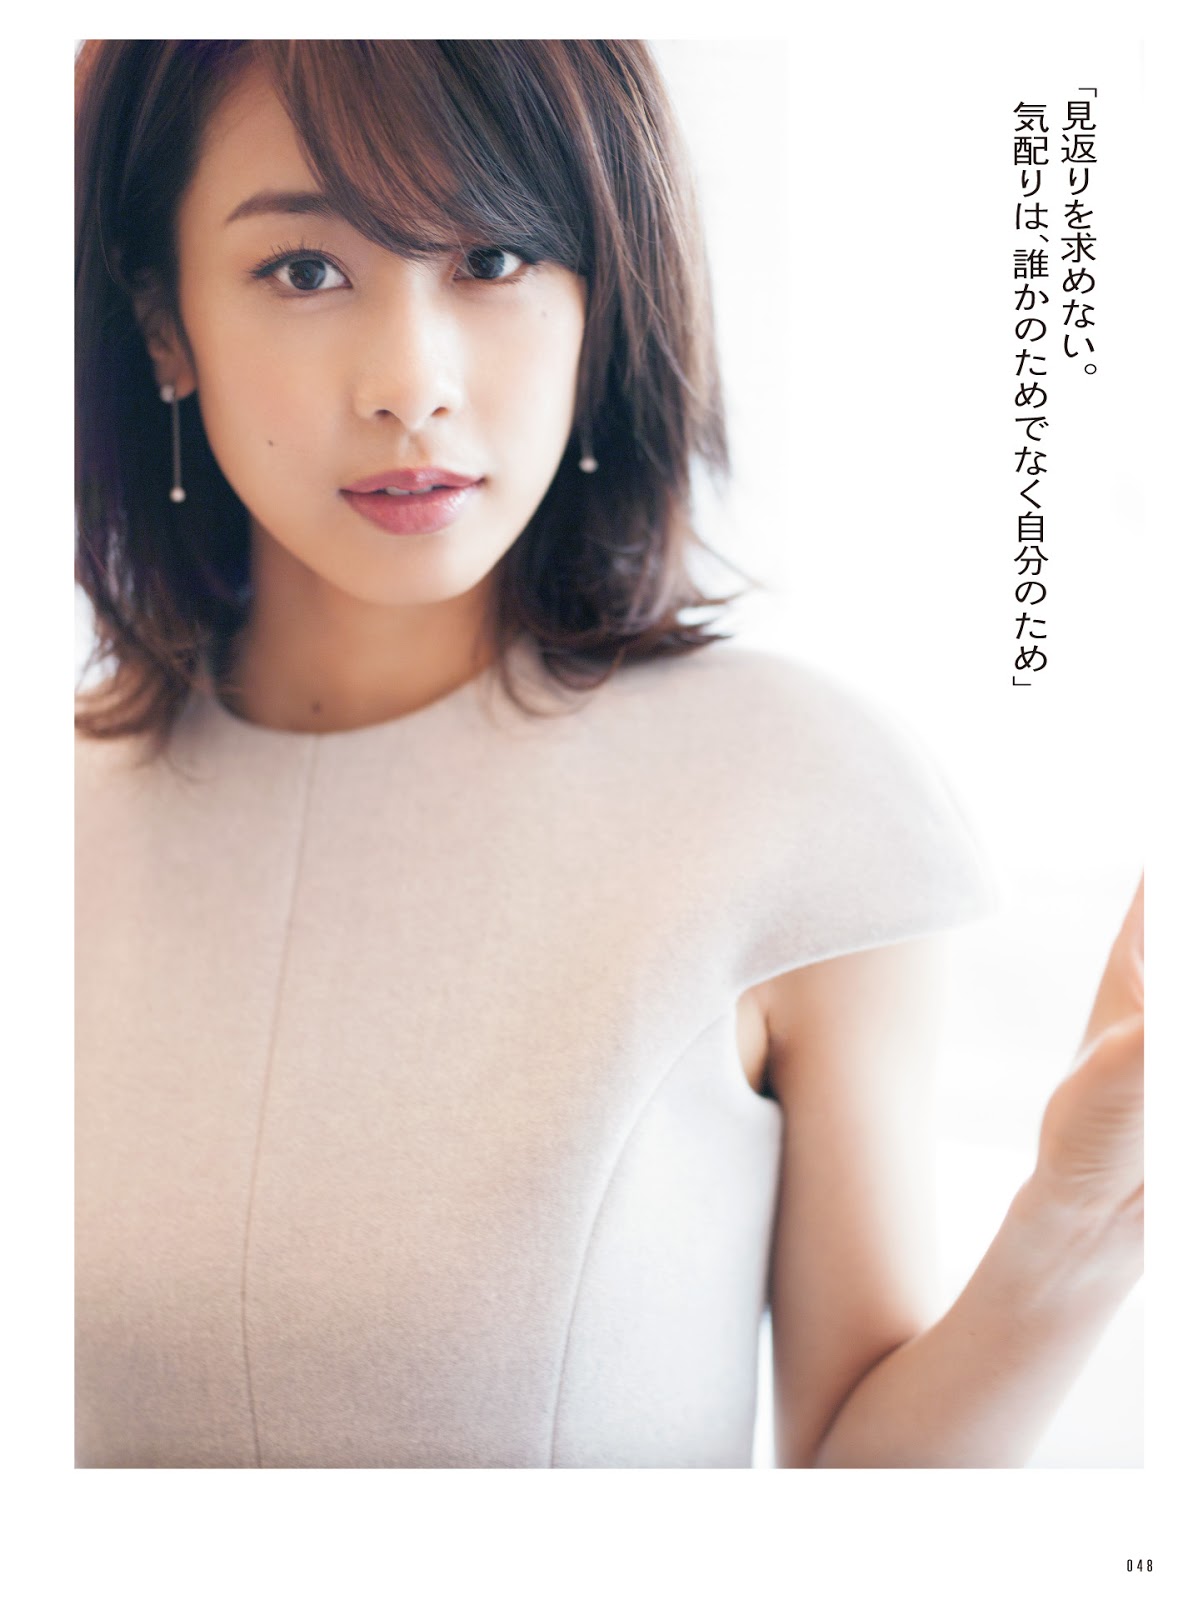 Nao Kanzaki and a few friends: Ayako Kato: Her intro post #1.